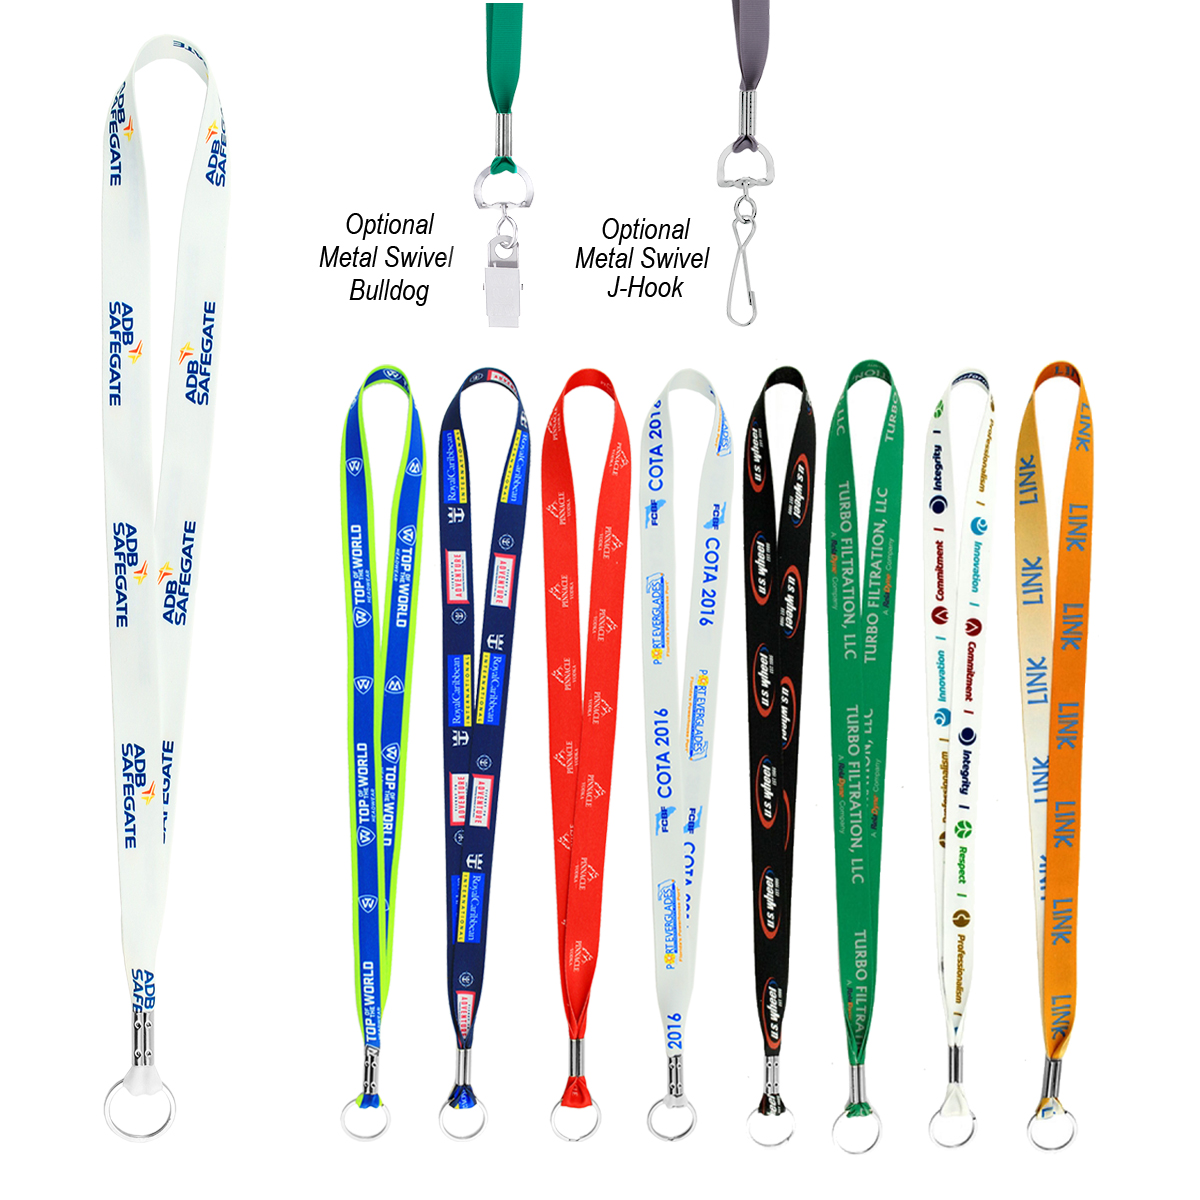 Dye Sublimation Lanyard - 1/2 inch - DSPOLY12 - IdeaStage